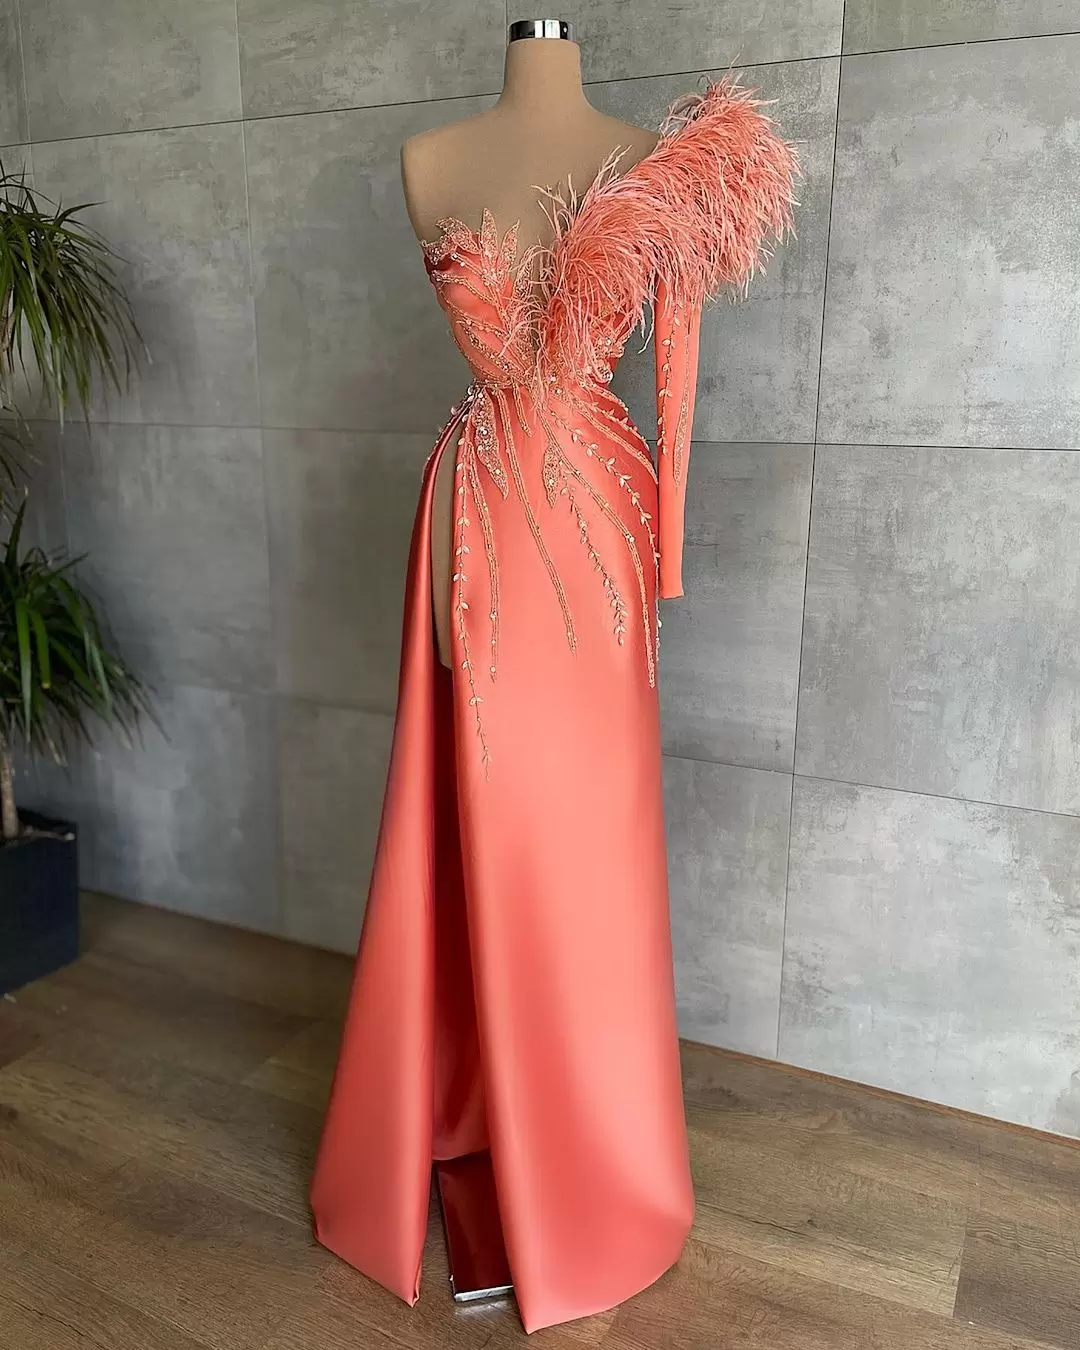 Feather Decor One Shoulder Red Carpet Sexy Evening Gown With High Split Formal Wear Prom Dress